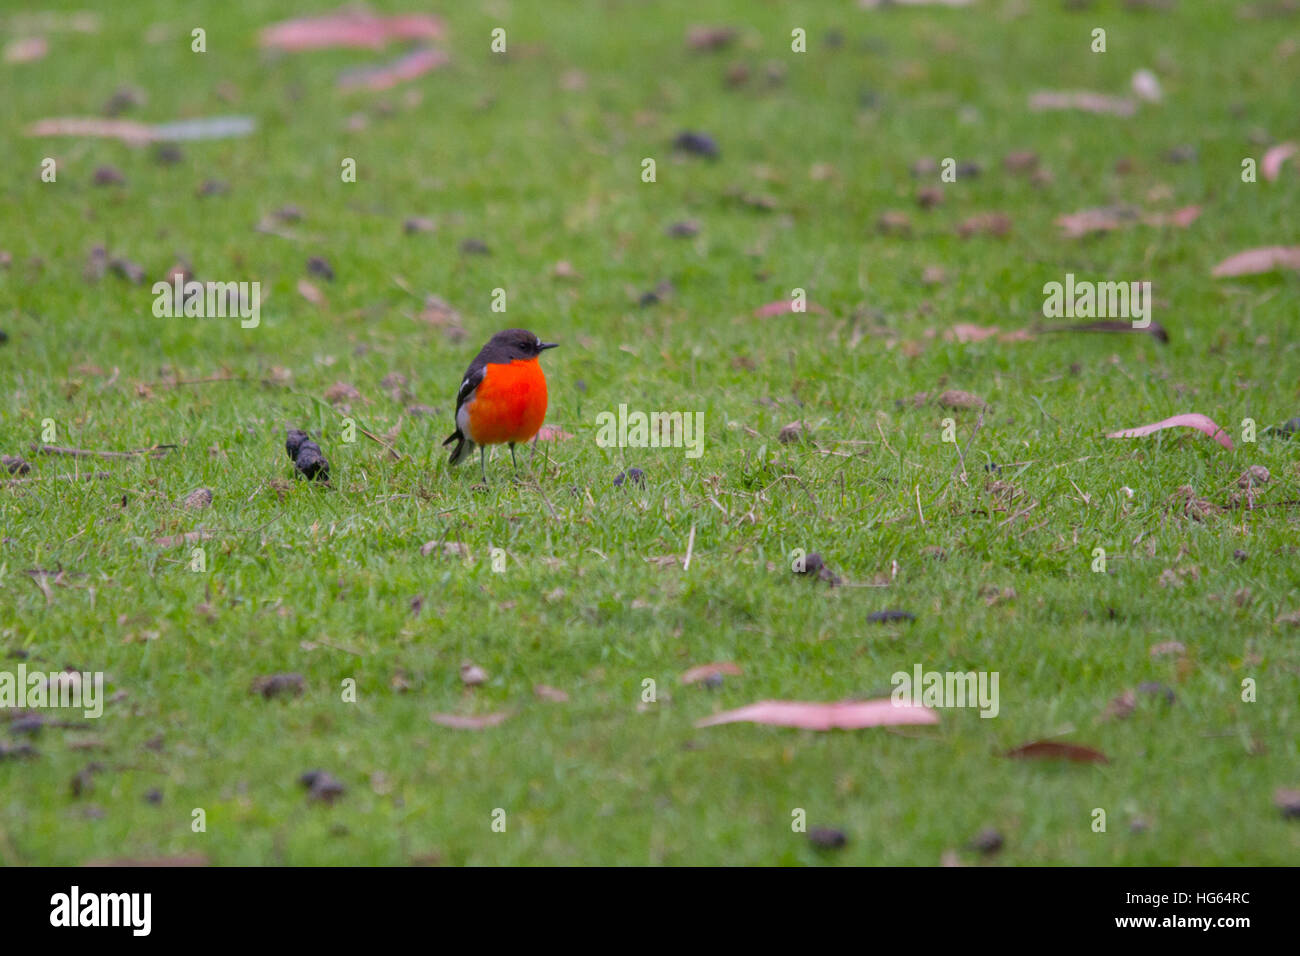 Flame robin (Petroica phoenicea) perched on the ground Stock Photo